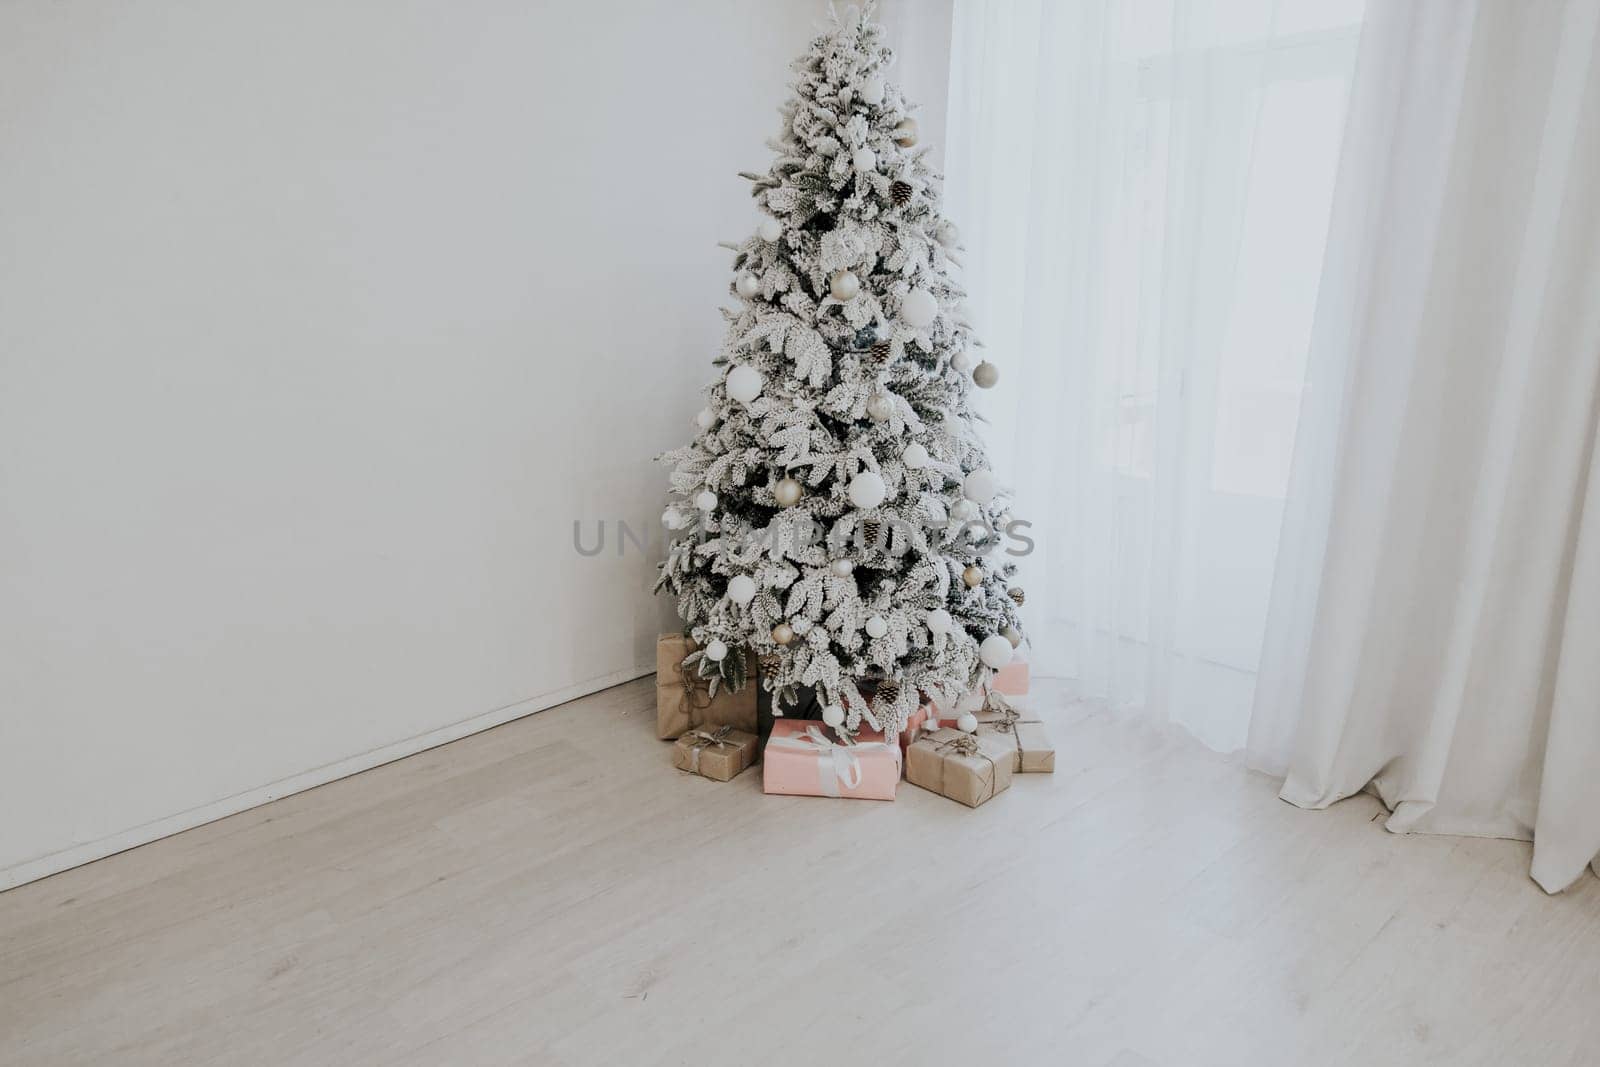 Christmas tree with presents, Garland lights Interior new year winter holiday